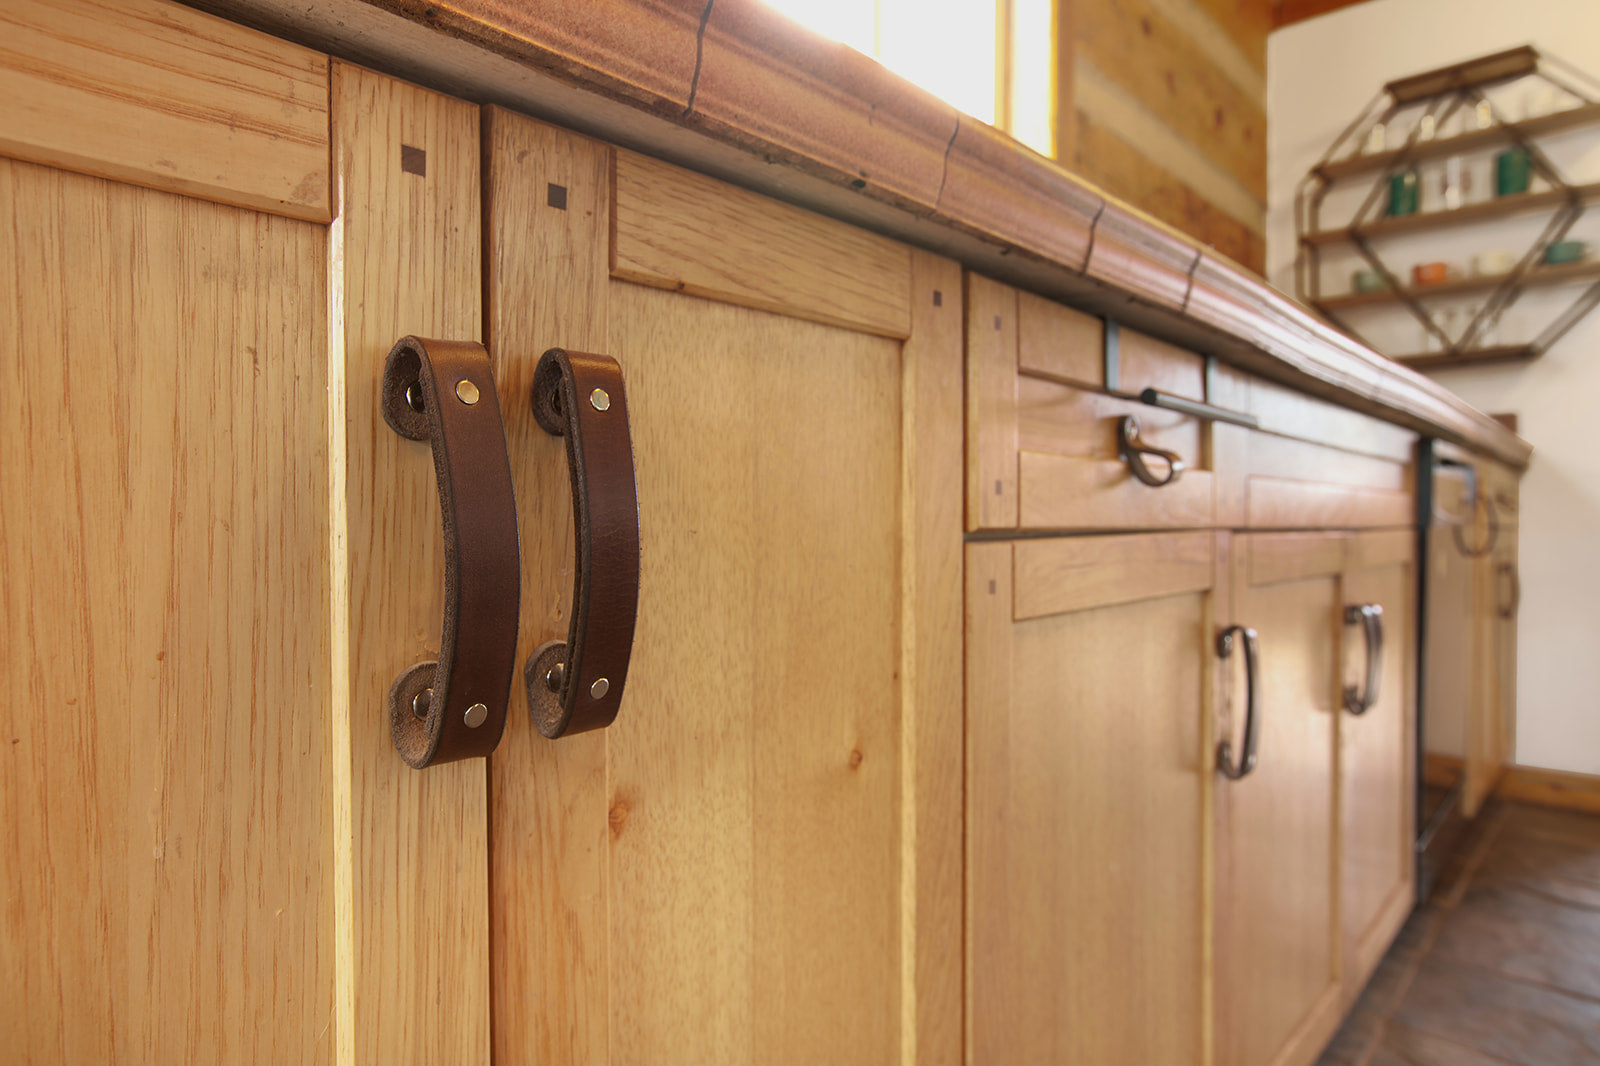 Leather drawer pulls freshen up old cabinets